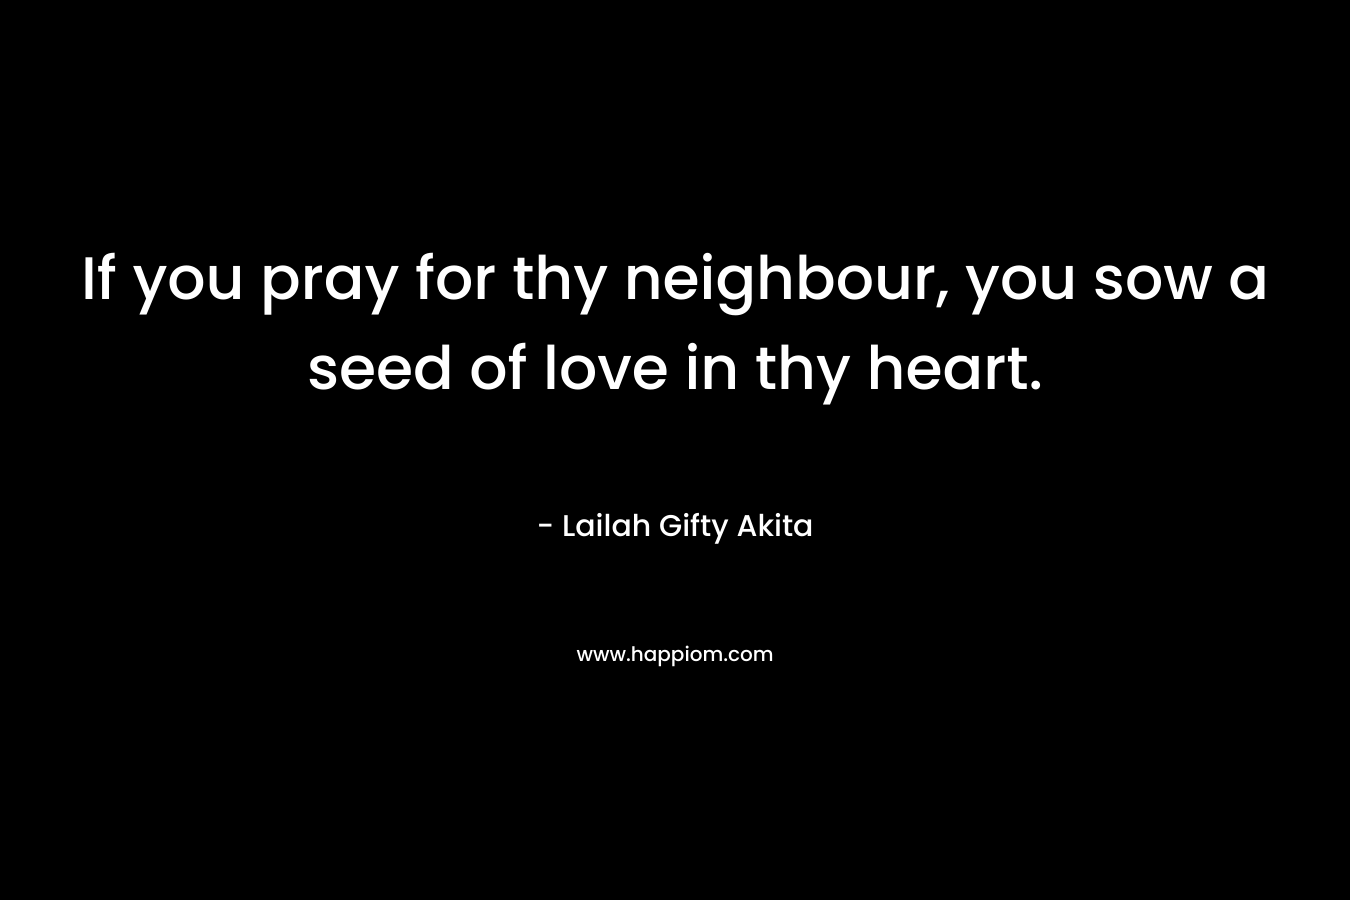 If you pray for thy neighbour, you sow a seed of love in thy heart.